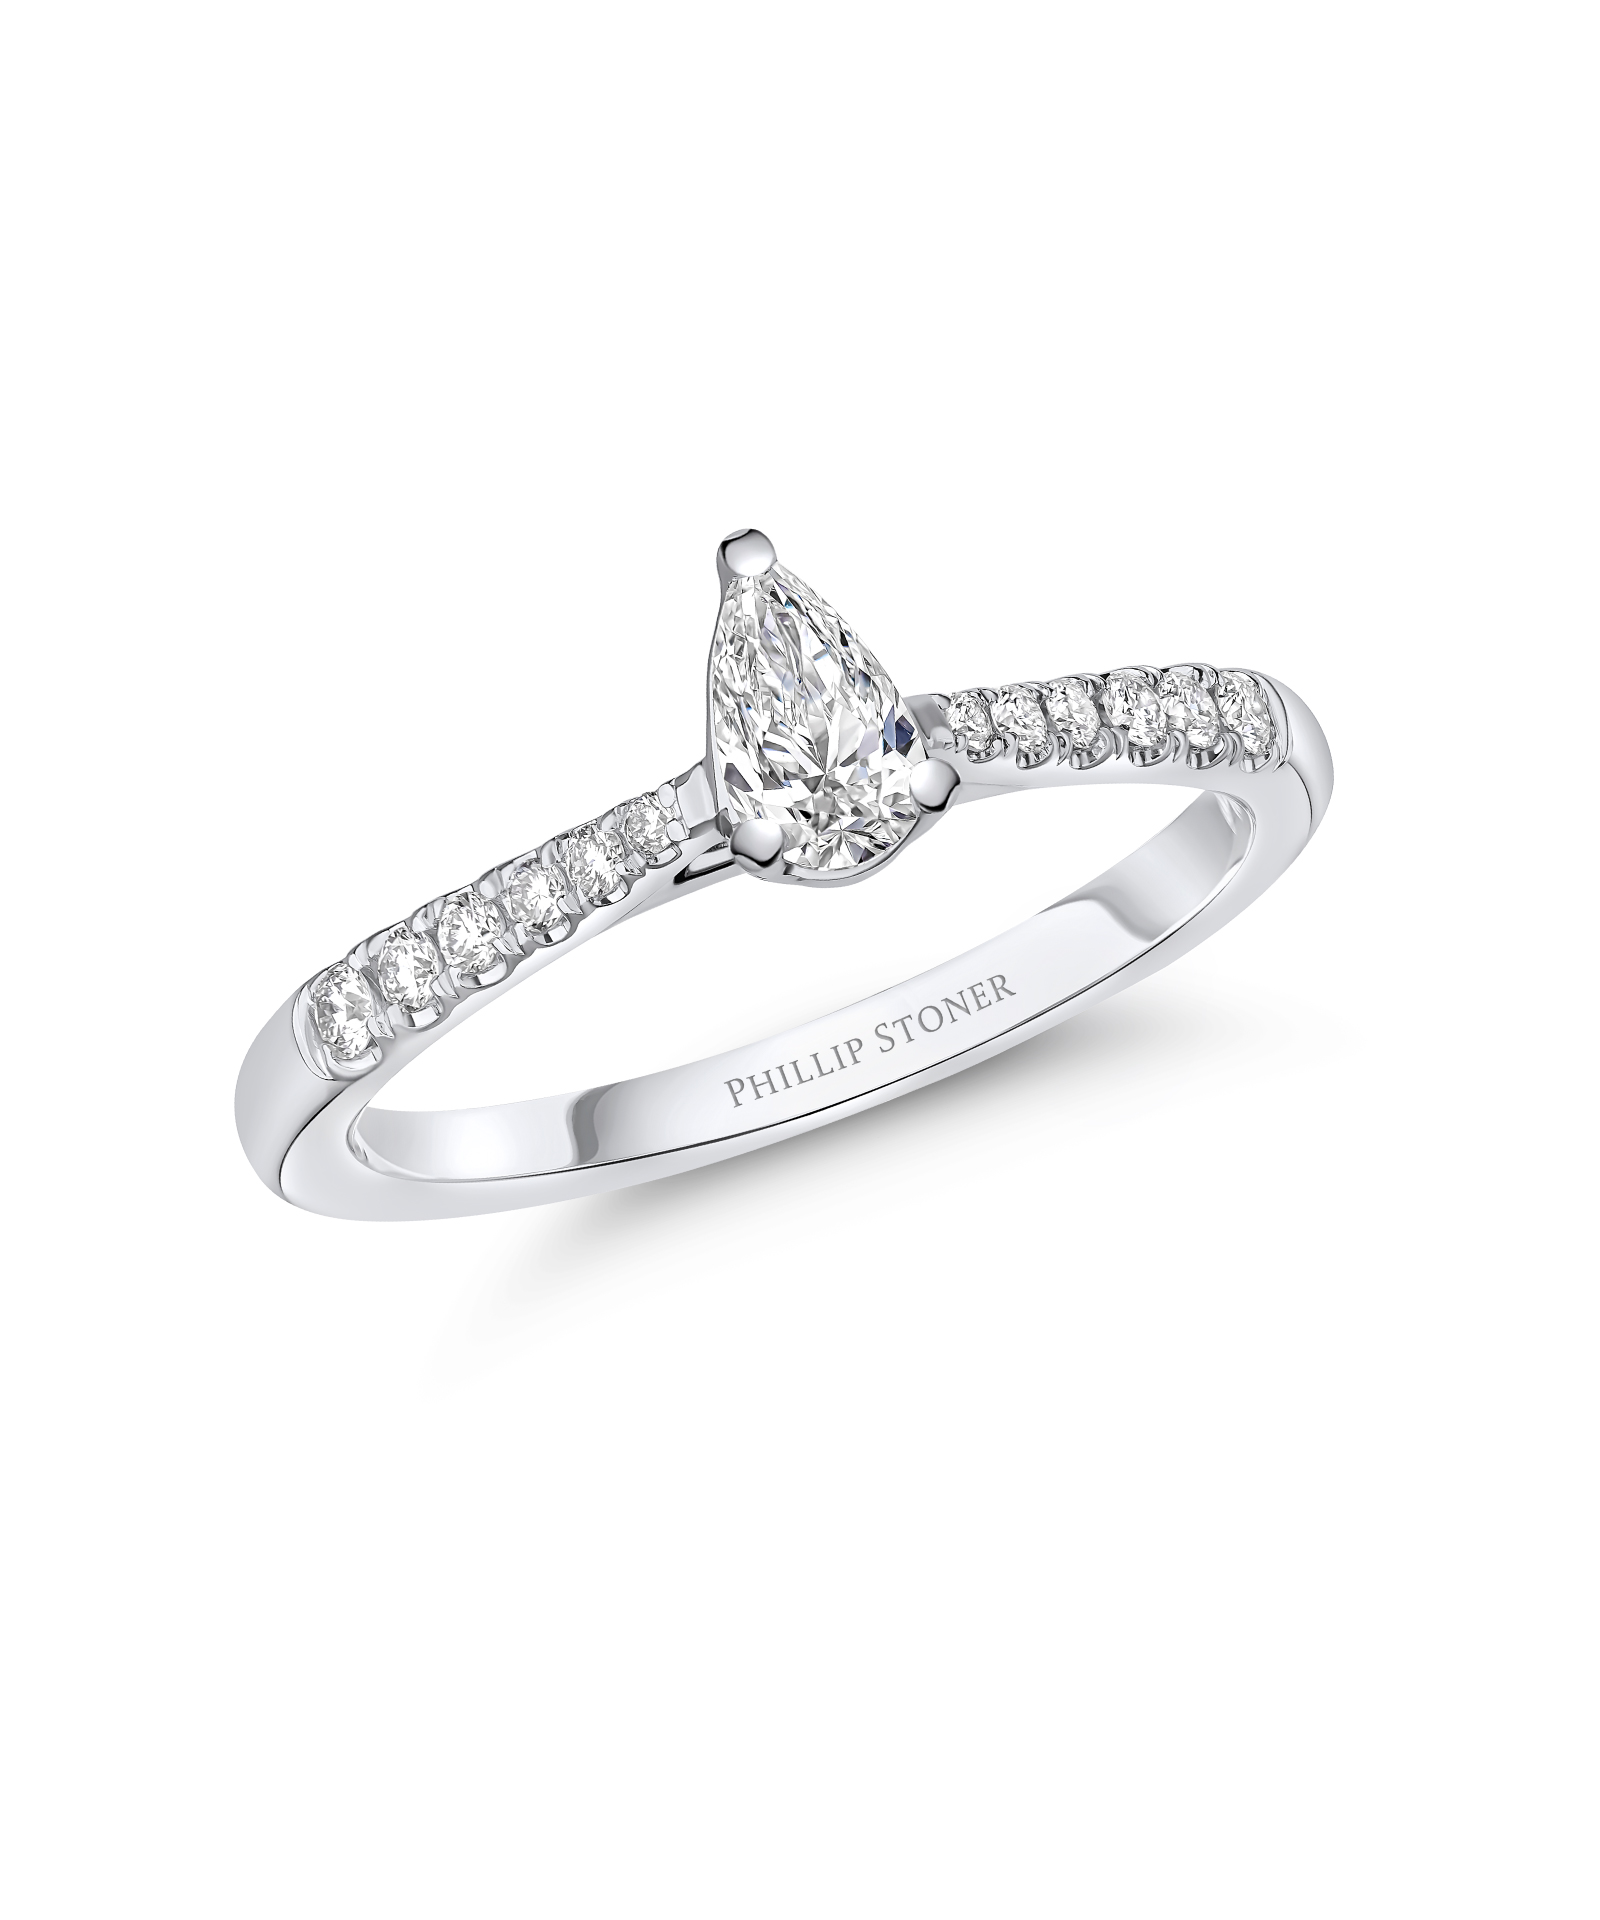 0.30ct Pear Cut Diamond Engagement Ring with Scallop Set Shoulders - Phillip Stoner The Jeweller